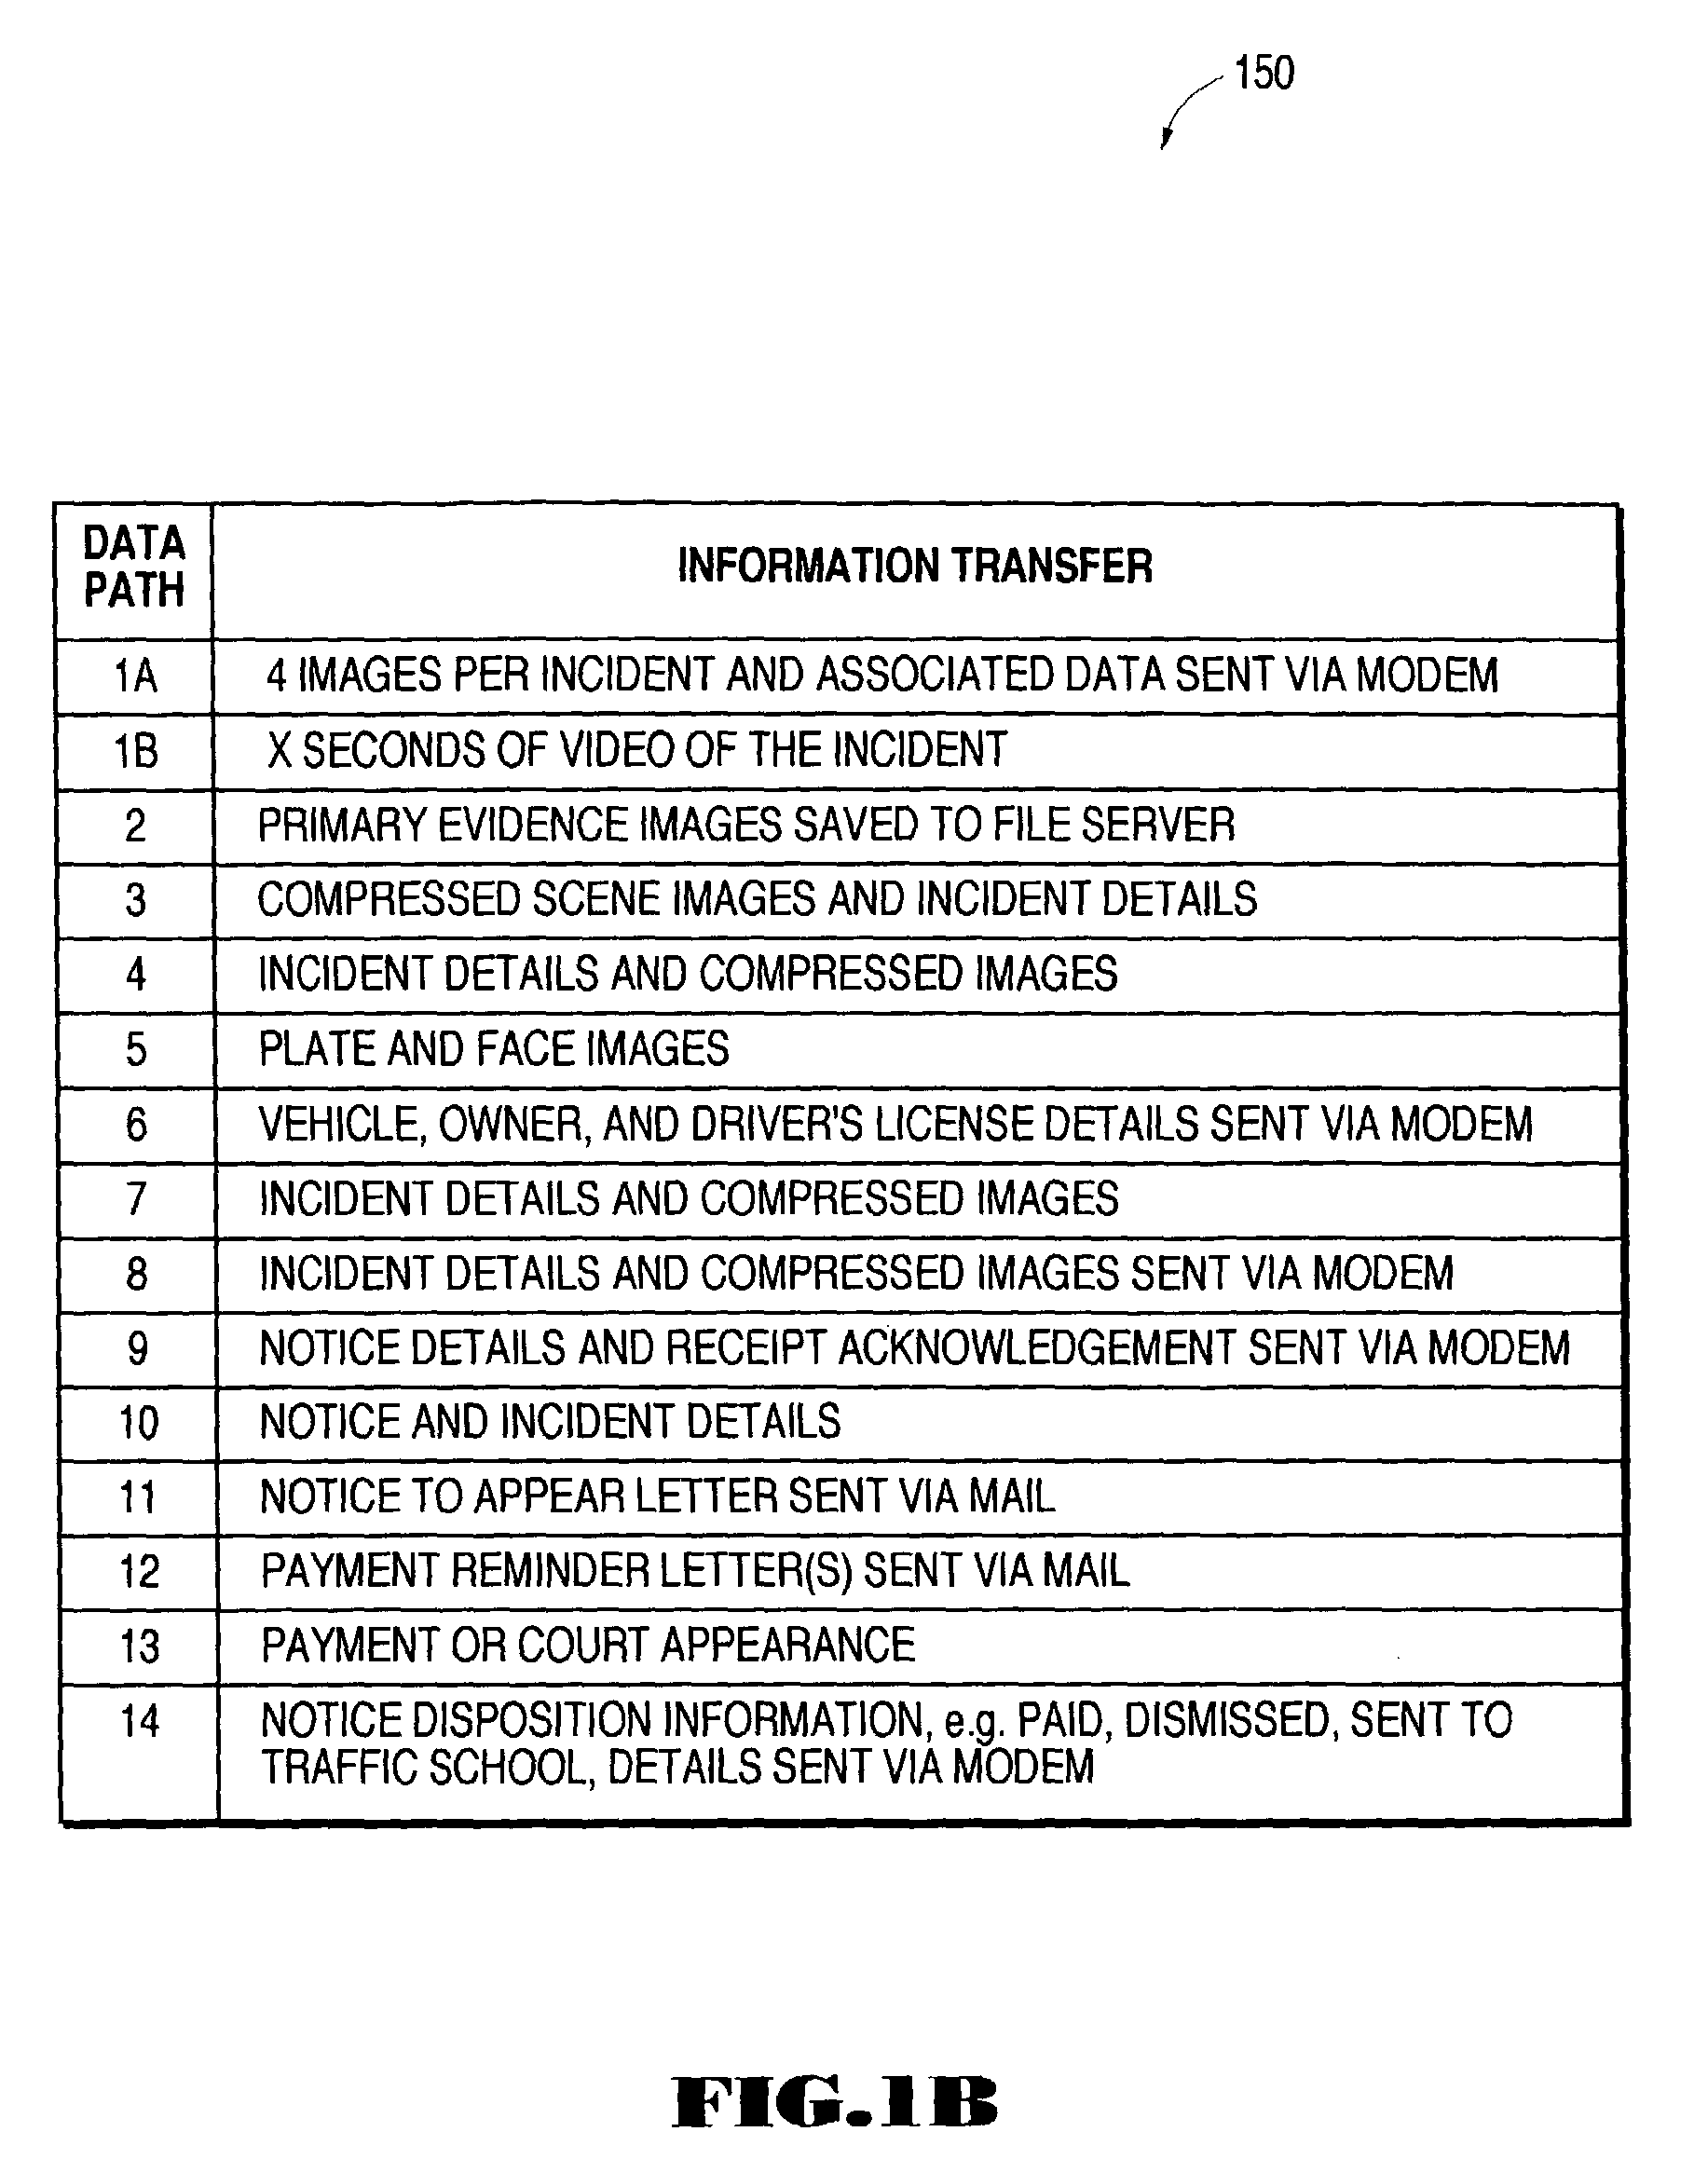 Automated traffic violation monitoring and reporting system with combined video and still-image data